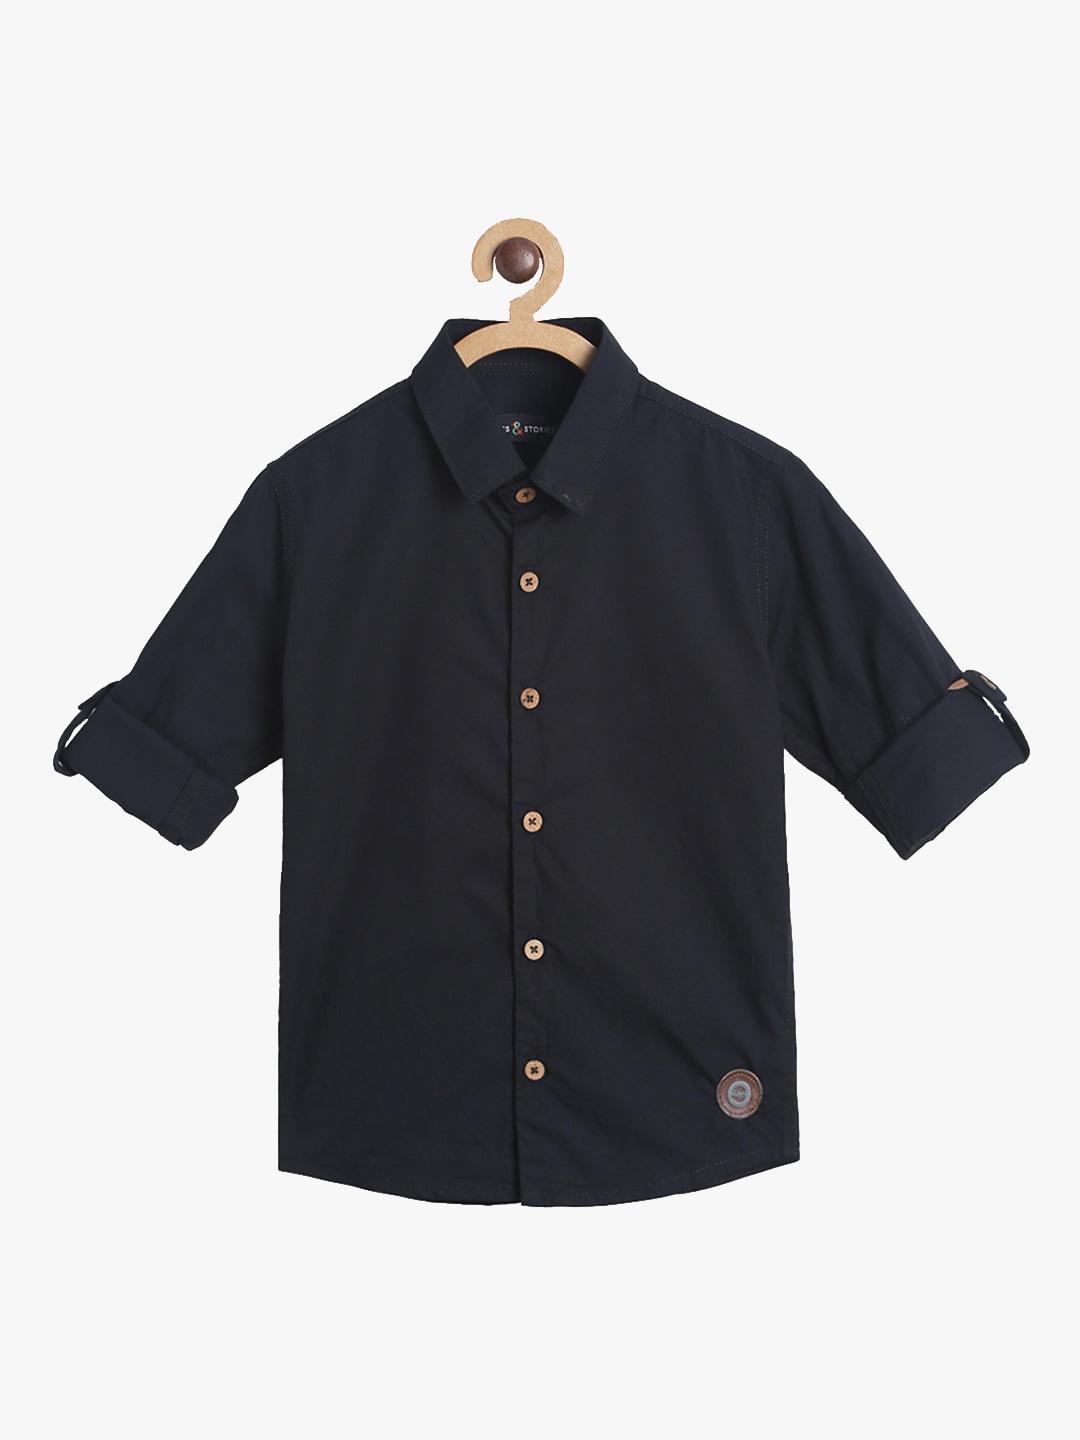 tales-&-stories-boys-black-regular-fit-solid-casual-cotton-shirt